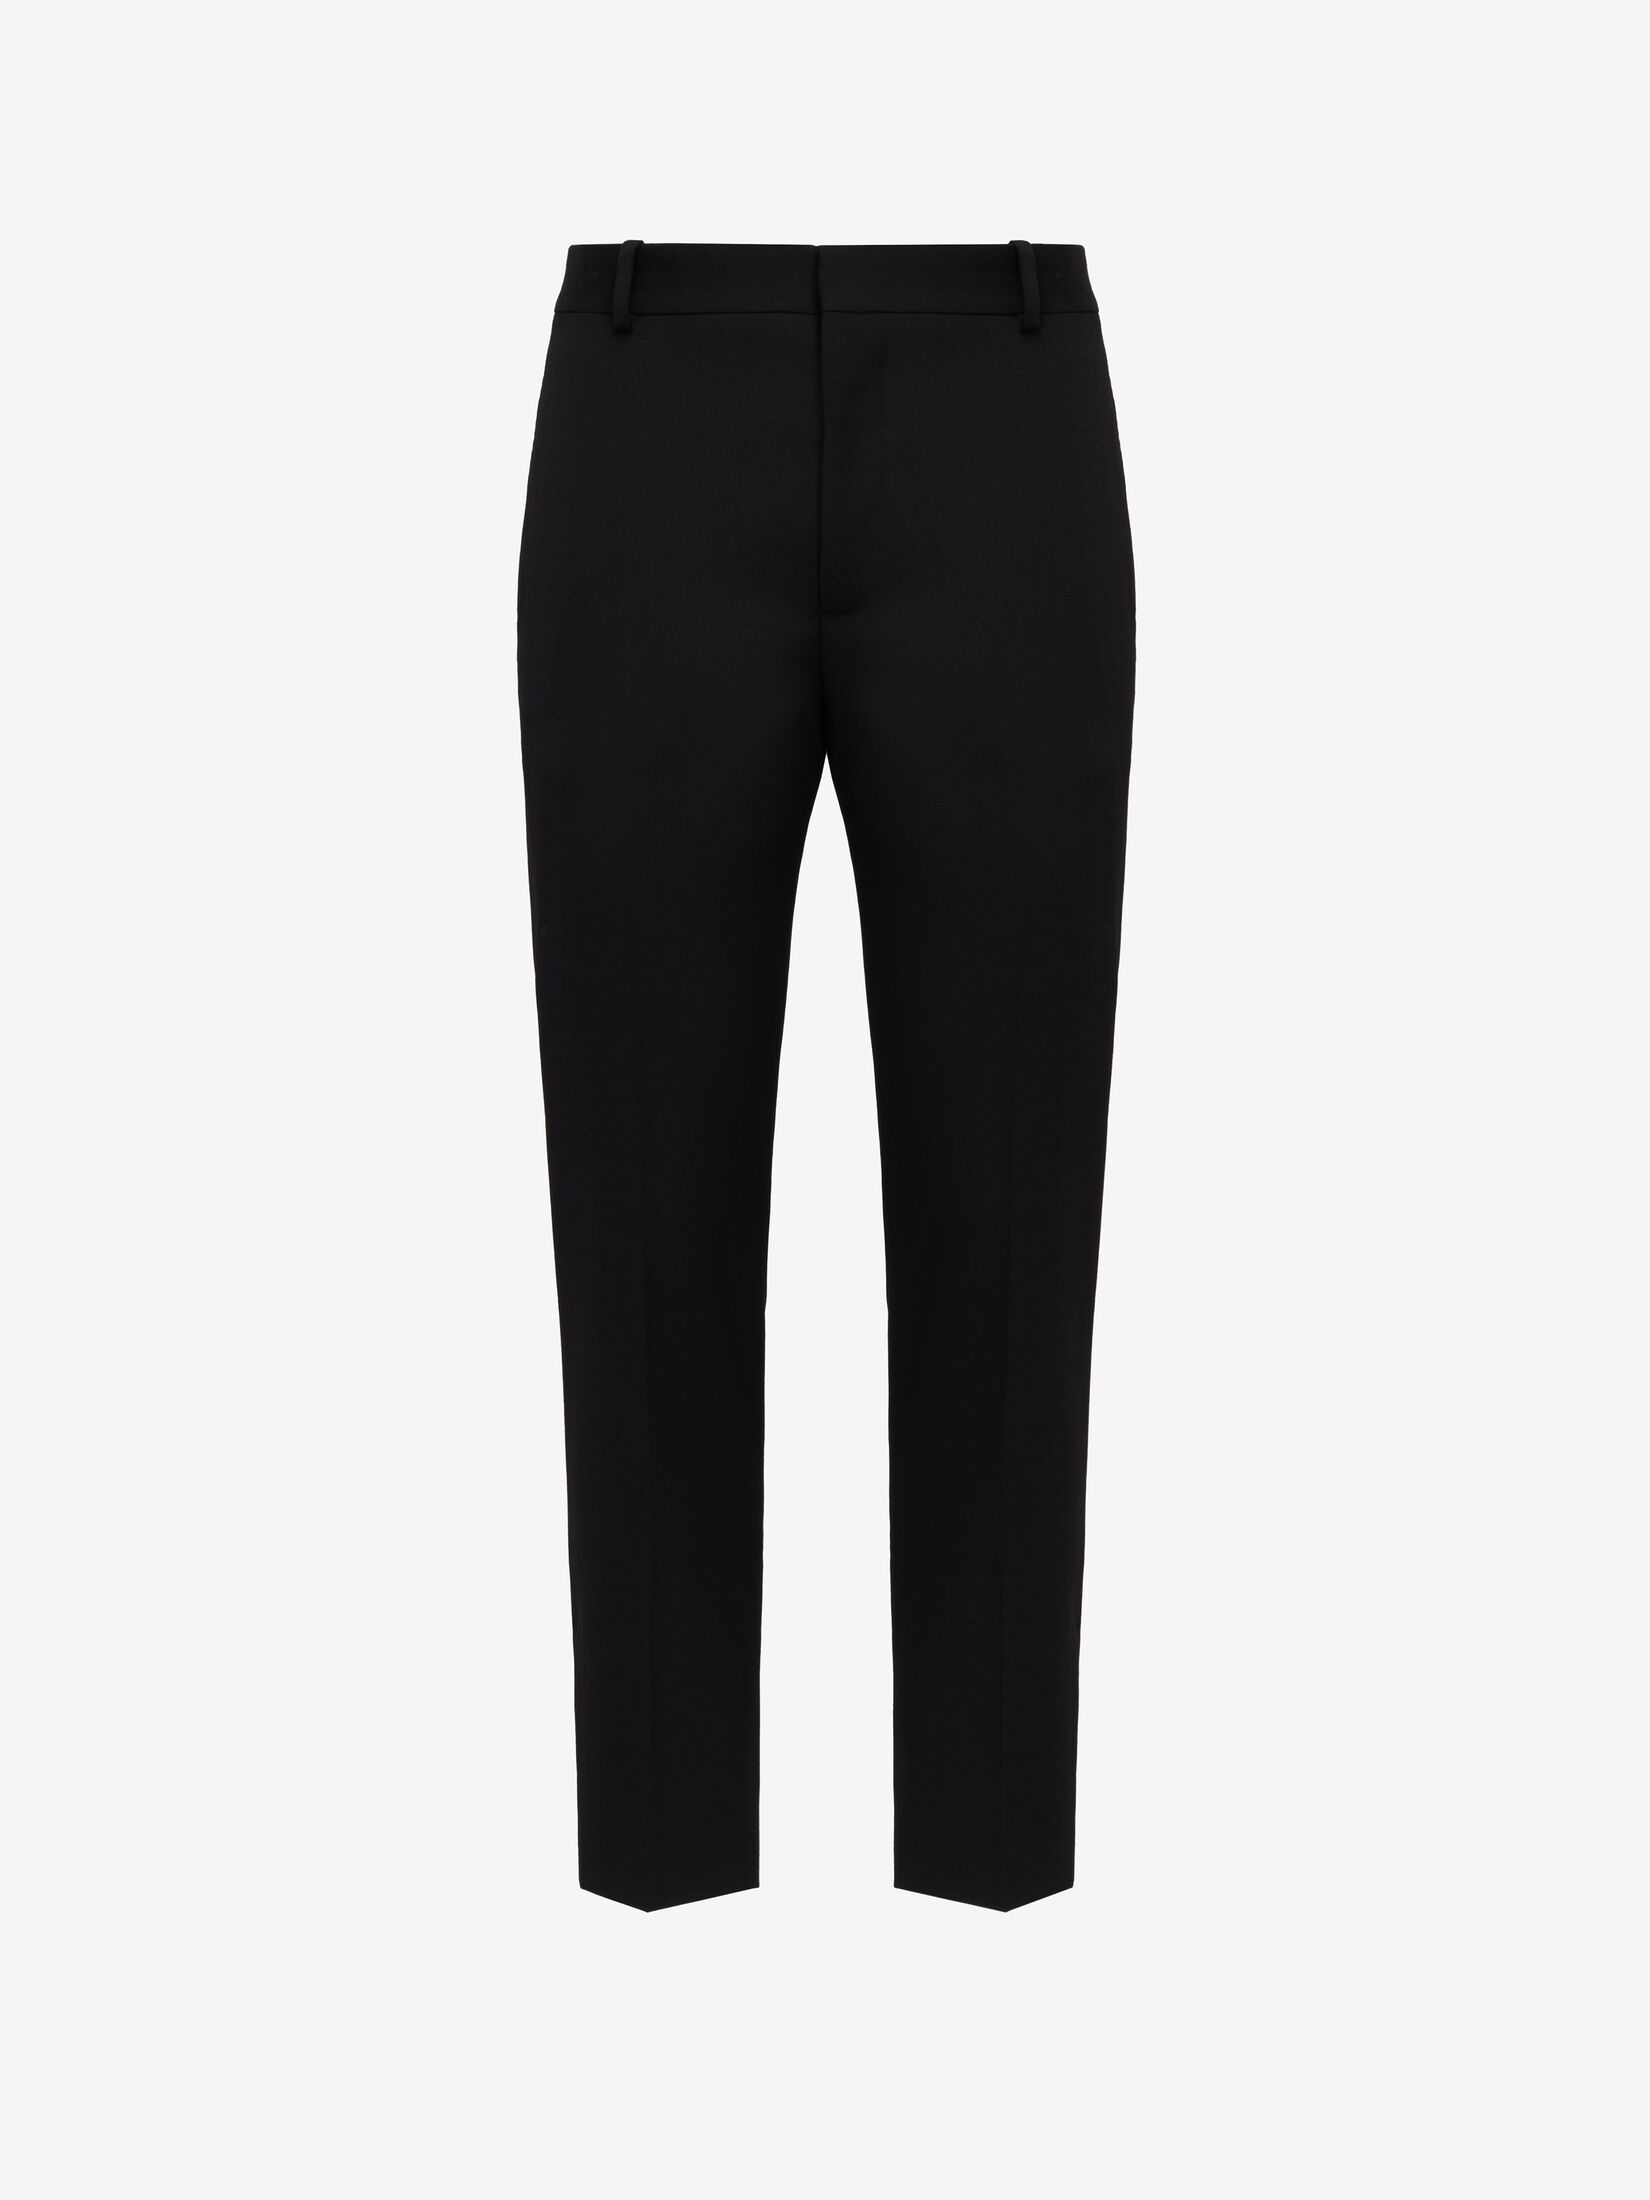 28 Pairs of Flared Pants, Wide-Leg Trousers, and Bell-Bottoms to Shop Now |  Vogue